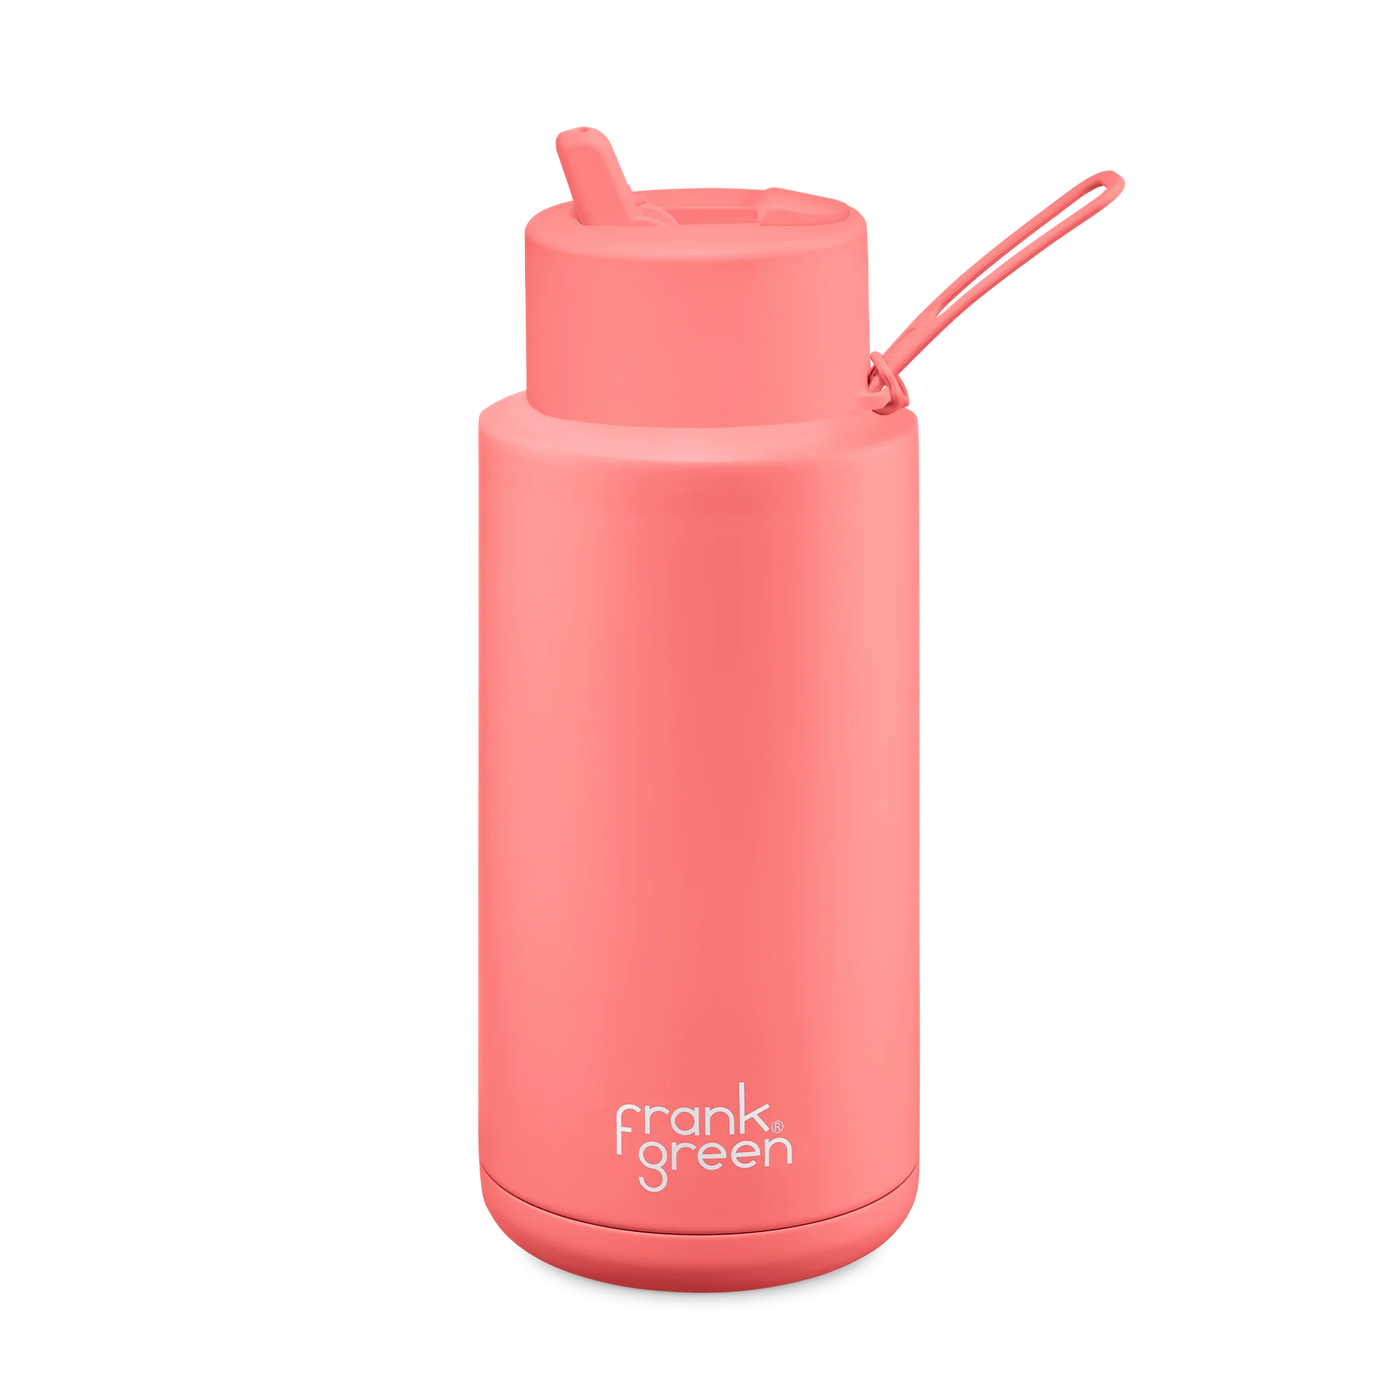 Frank Green Limited Edition Ceramic Reusable Bottle 34oz/1L - Sweet Peach Mealtime Frank Green 